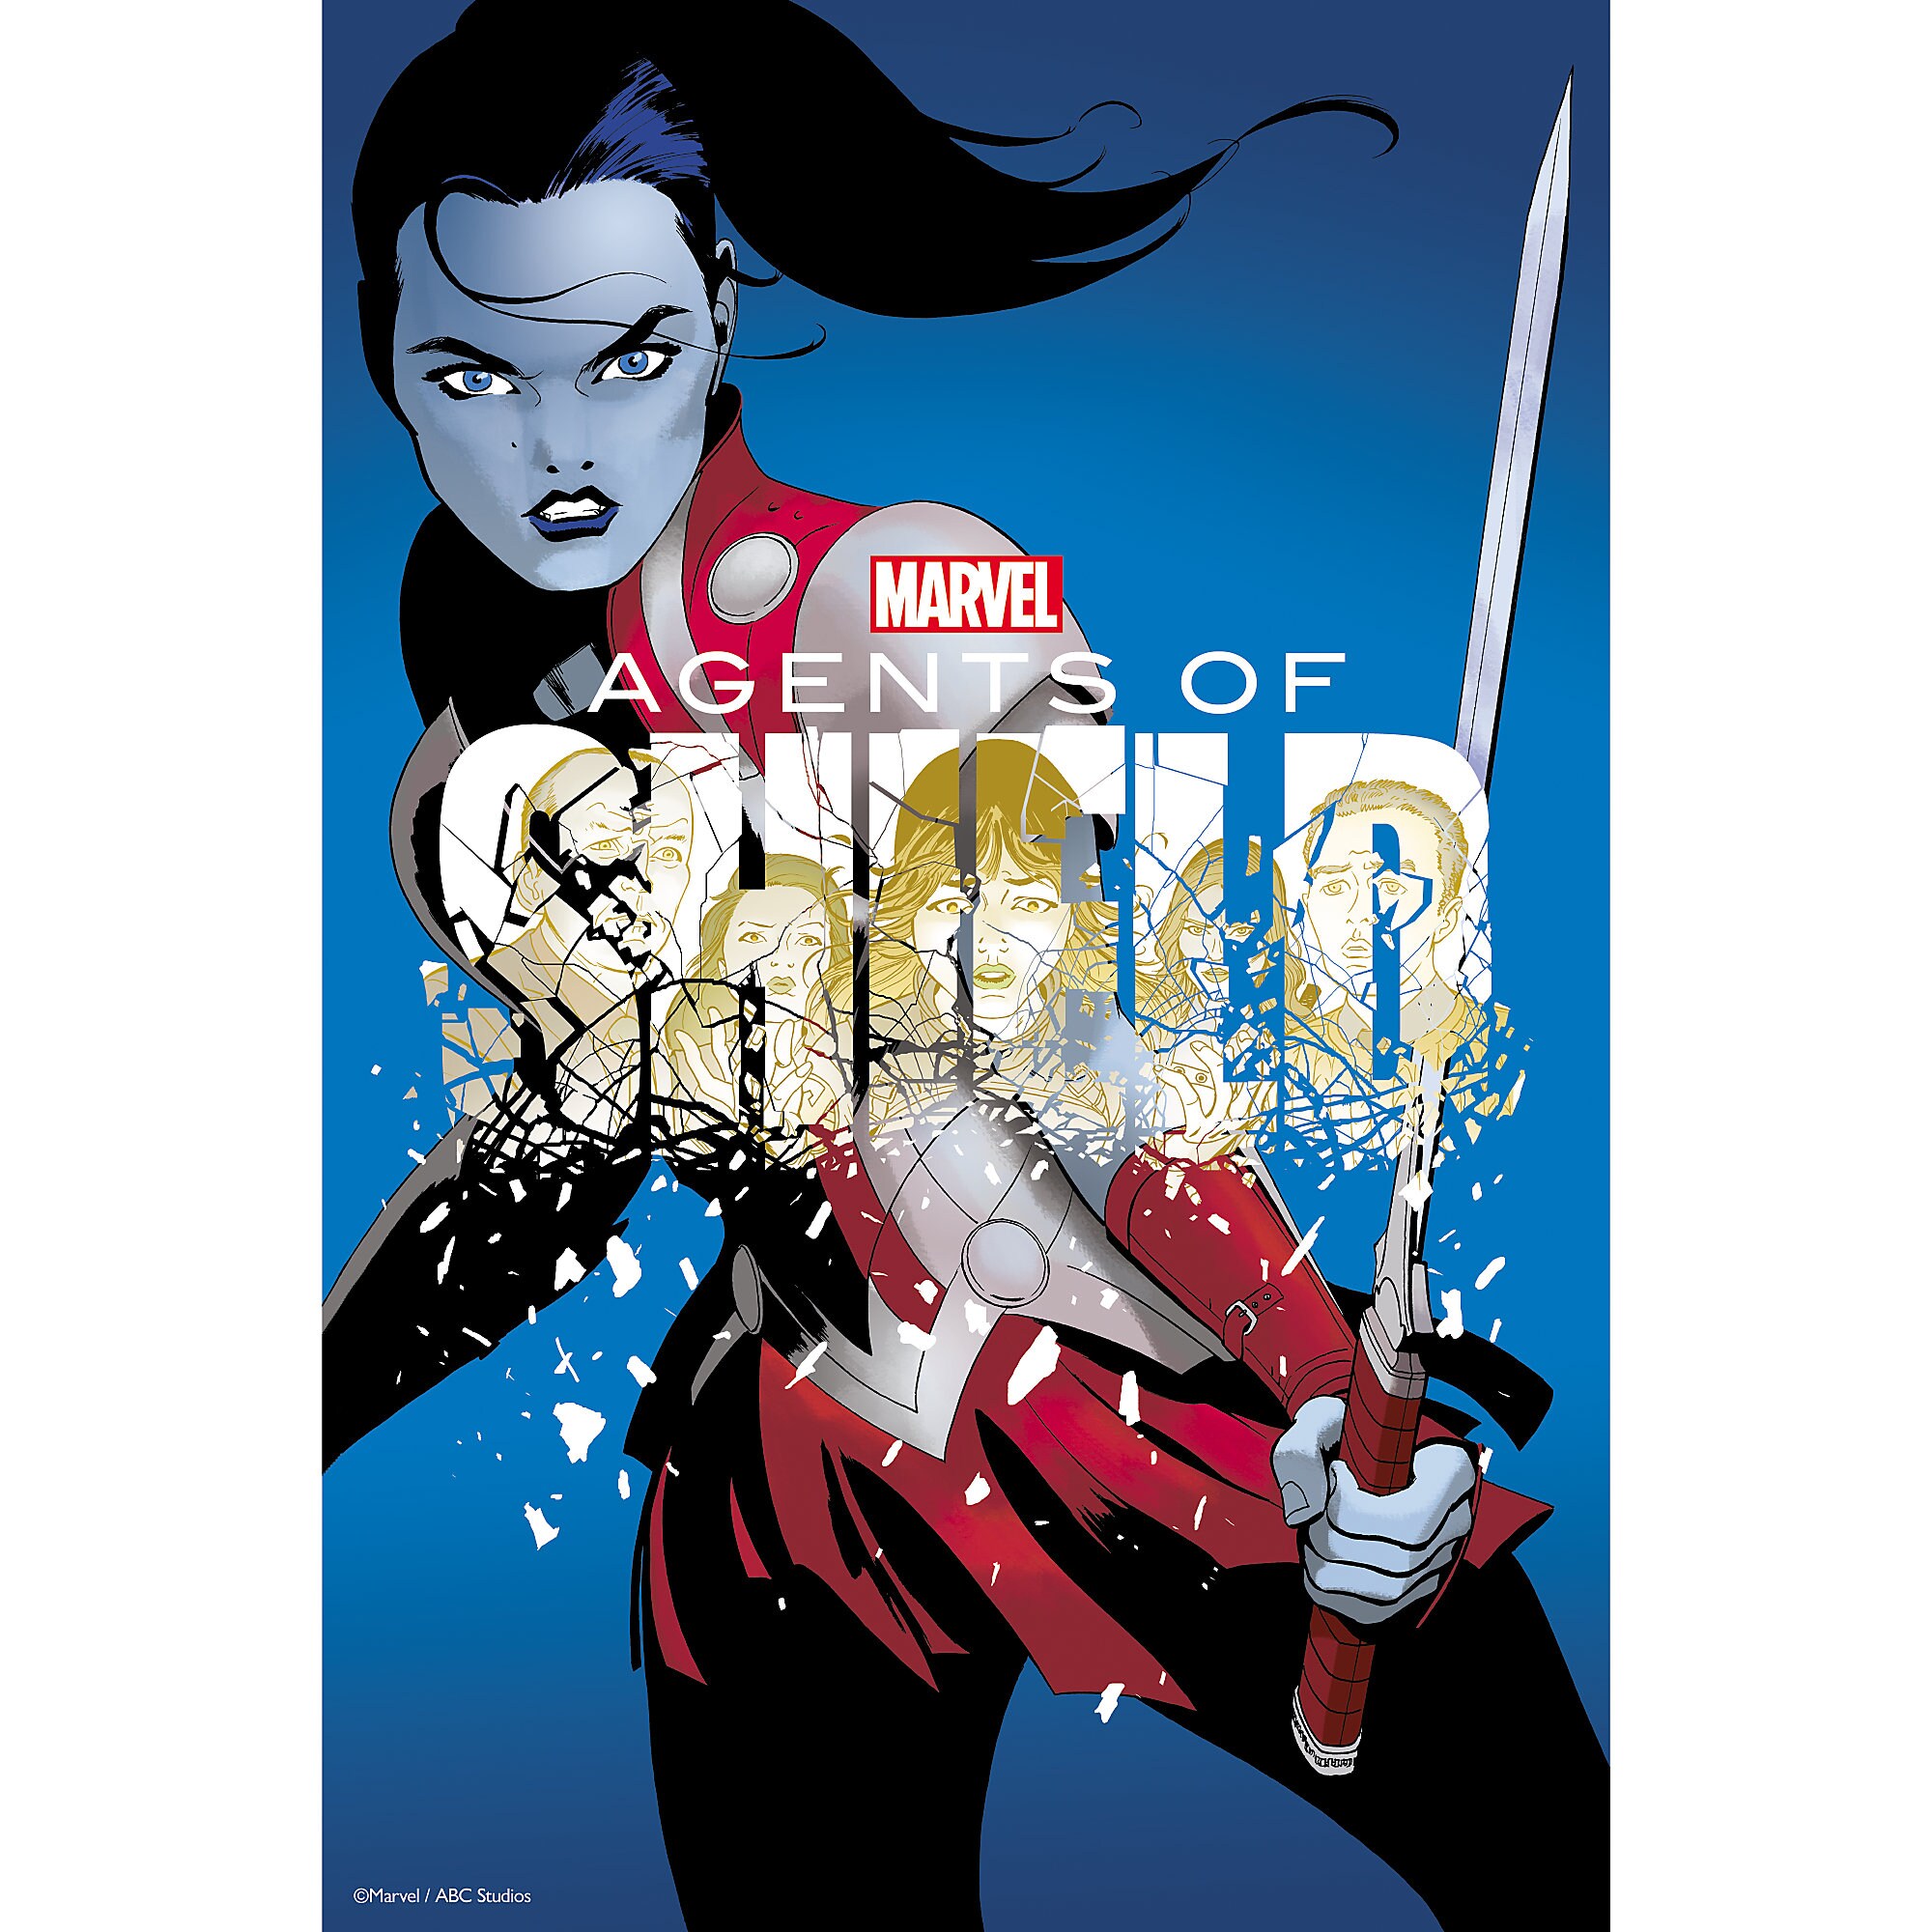 Marvel's Agents of S.H.I.E.L.D. ''Who You Really Are'' Print - Limited Edition